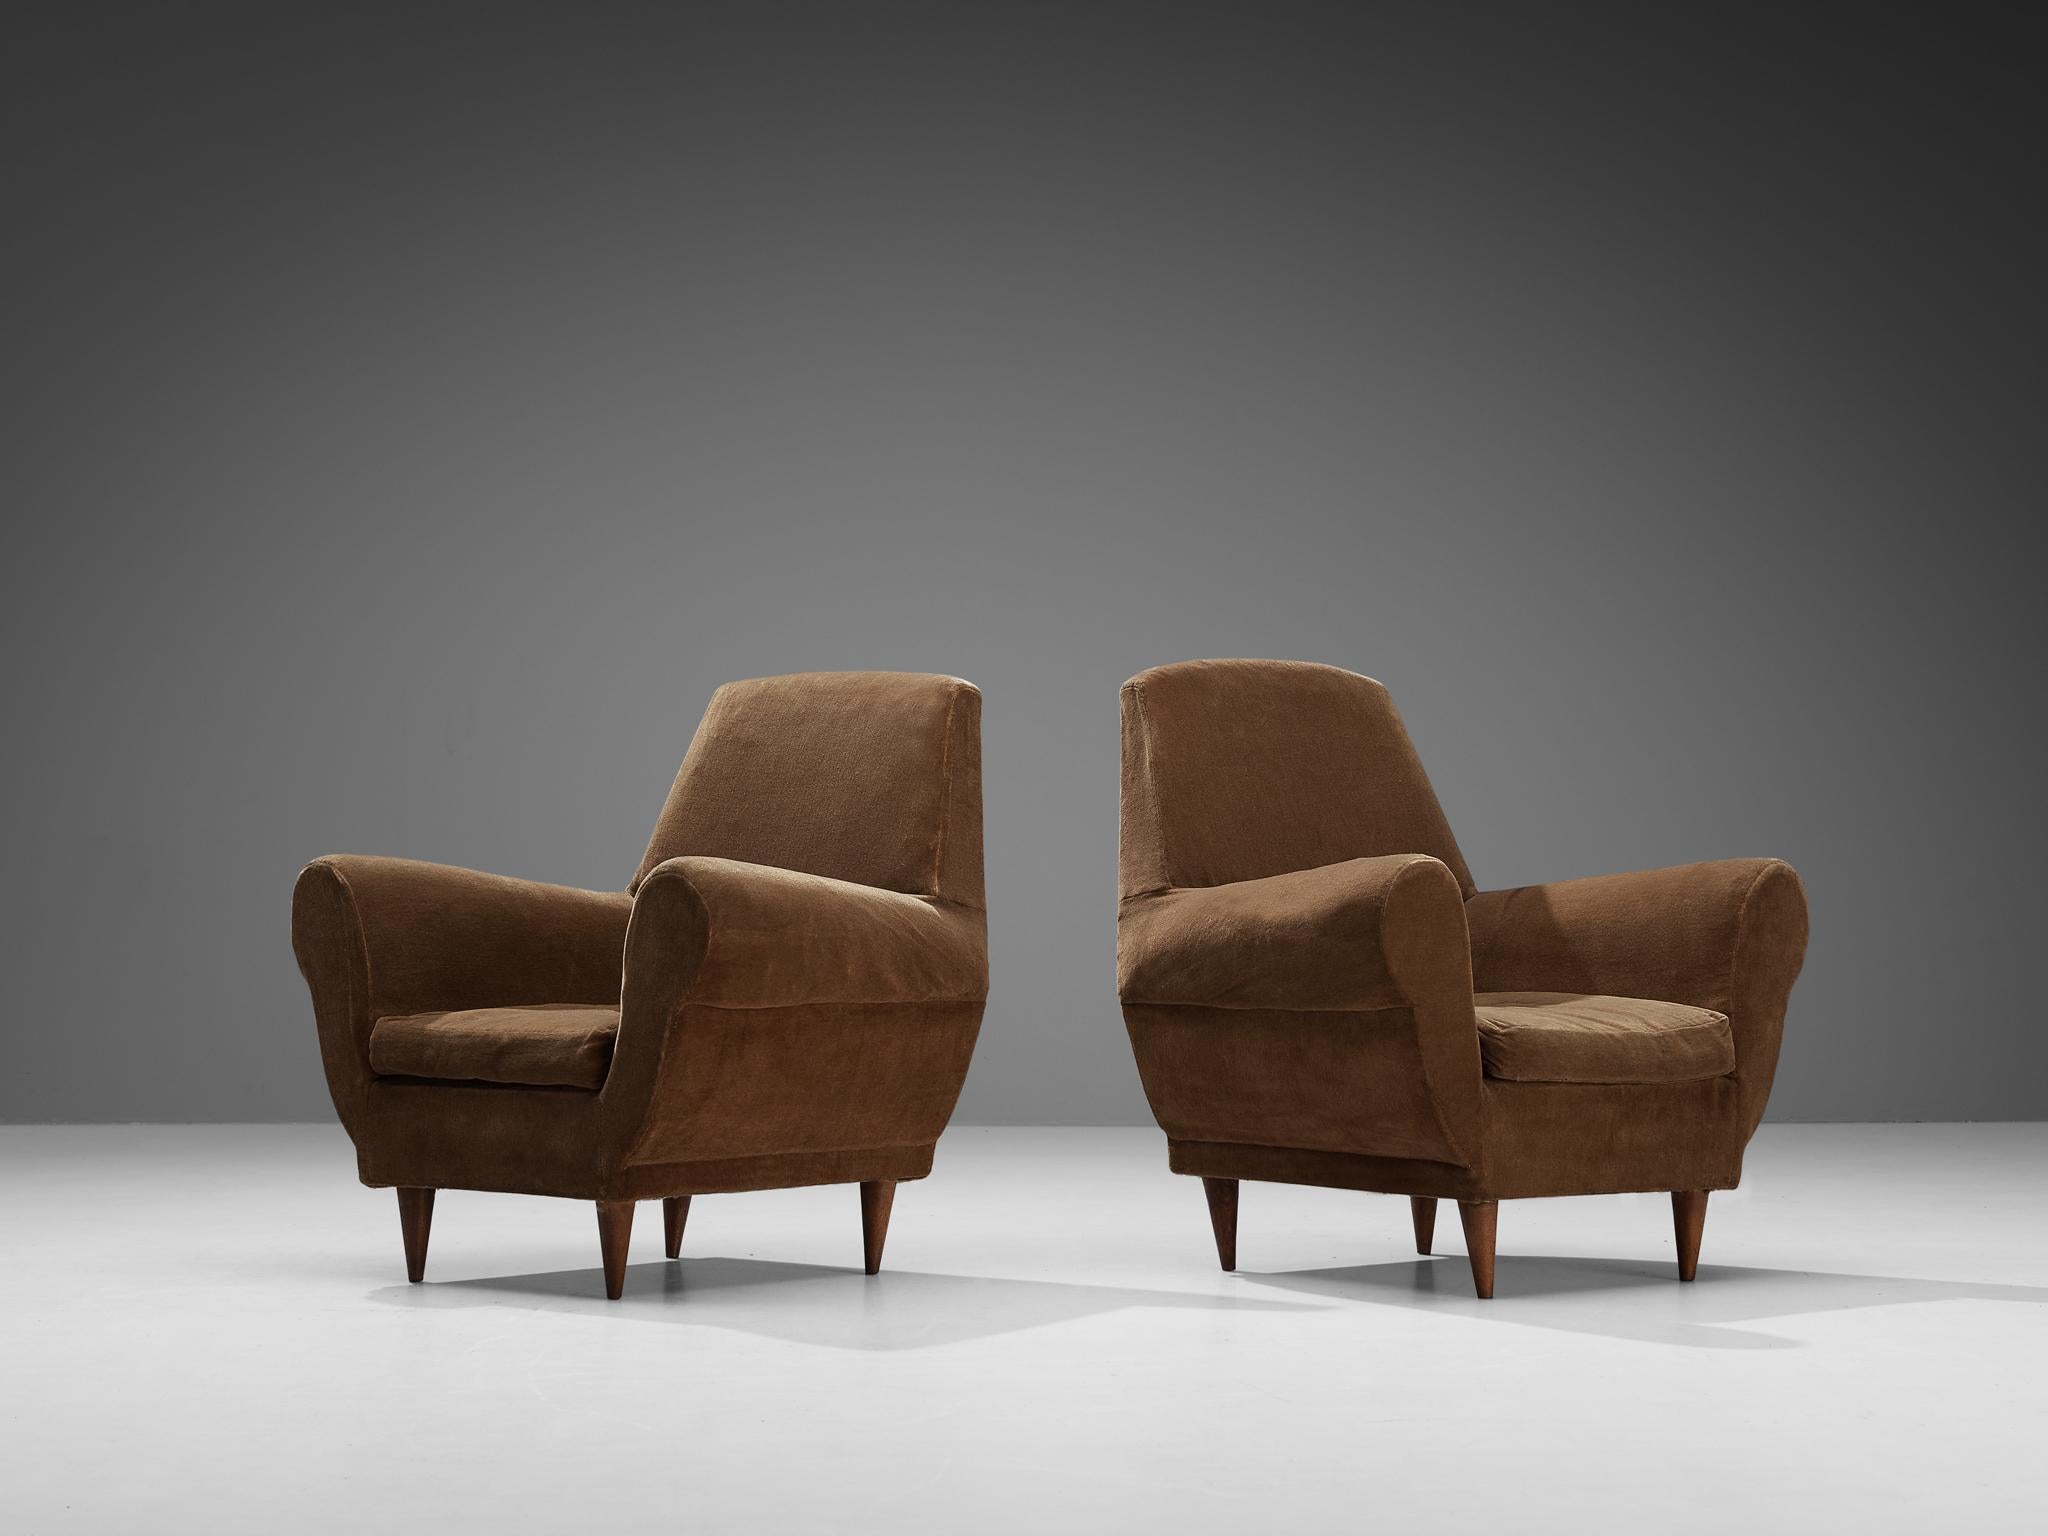 Pair of lounge chairs, velvet, teak, Italy, 1950s

An extremely elegant pair of armchairs, made in Italy in the 1950s. The seat is beautifully made and embodies a splendid construction of round shapes and curved lines. The body is upholstered in a